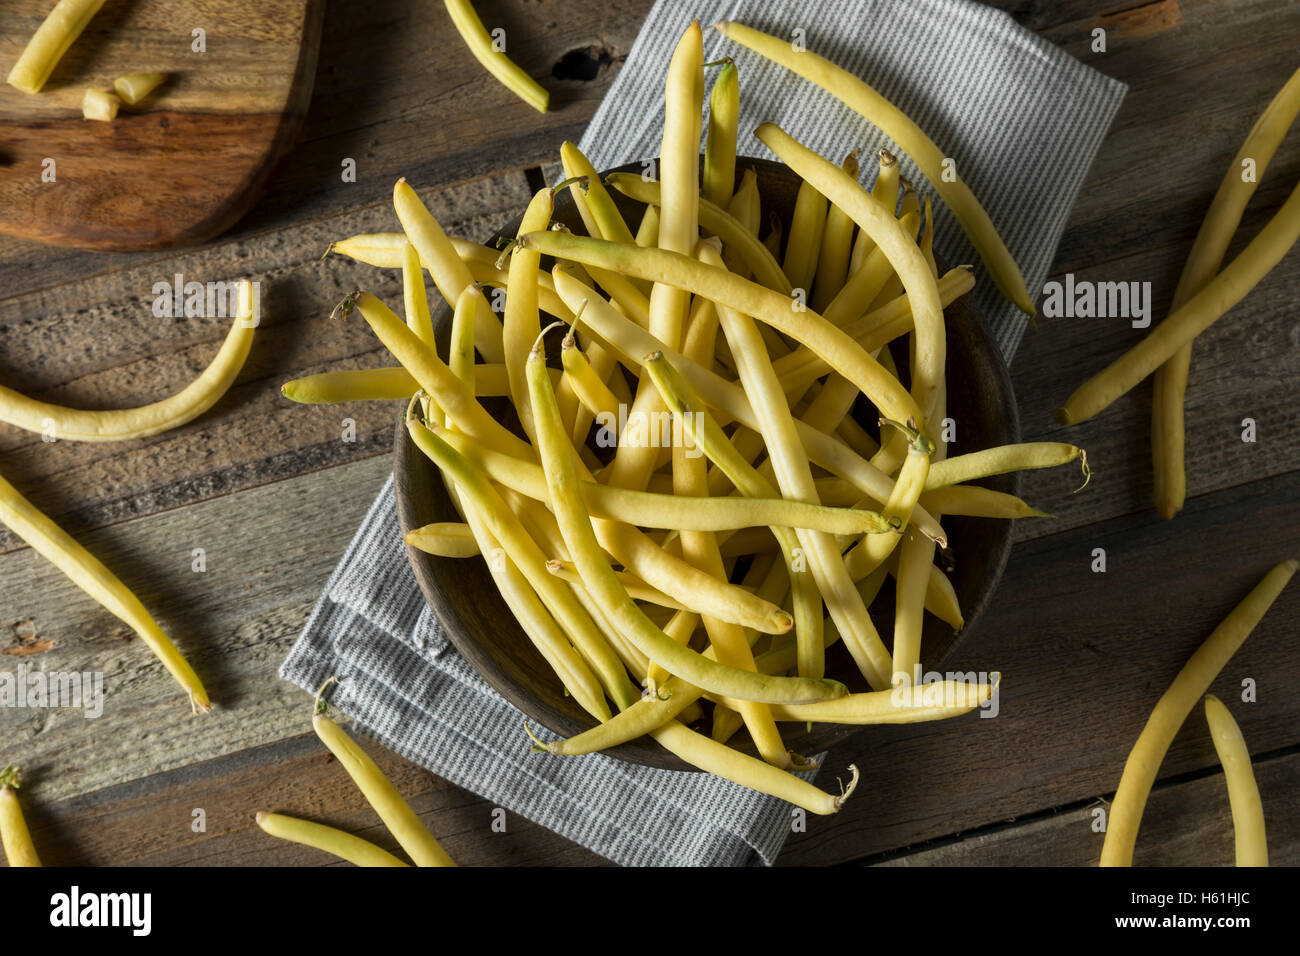 Raw Organic Yellow Wax Beans Ready to Cook Stock Photo